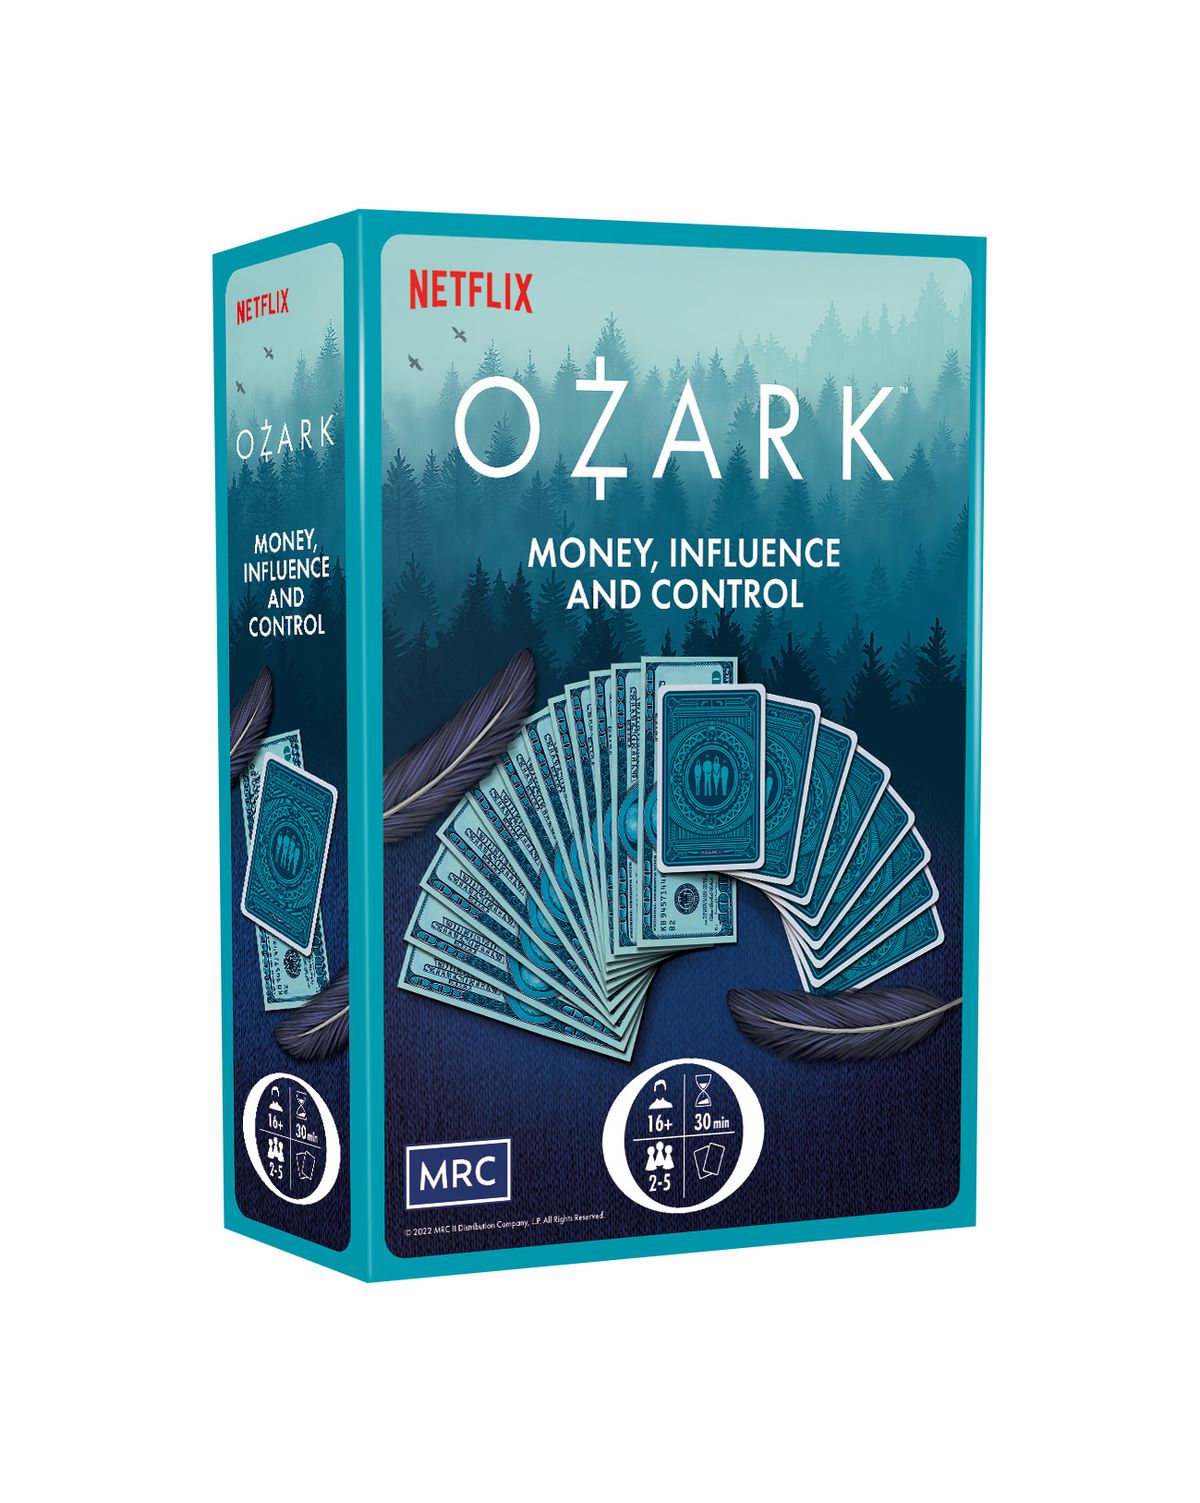 The box for Netflix and Asmodee’s Ozark card game